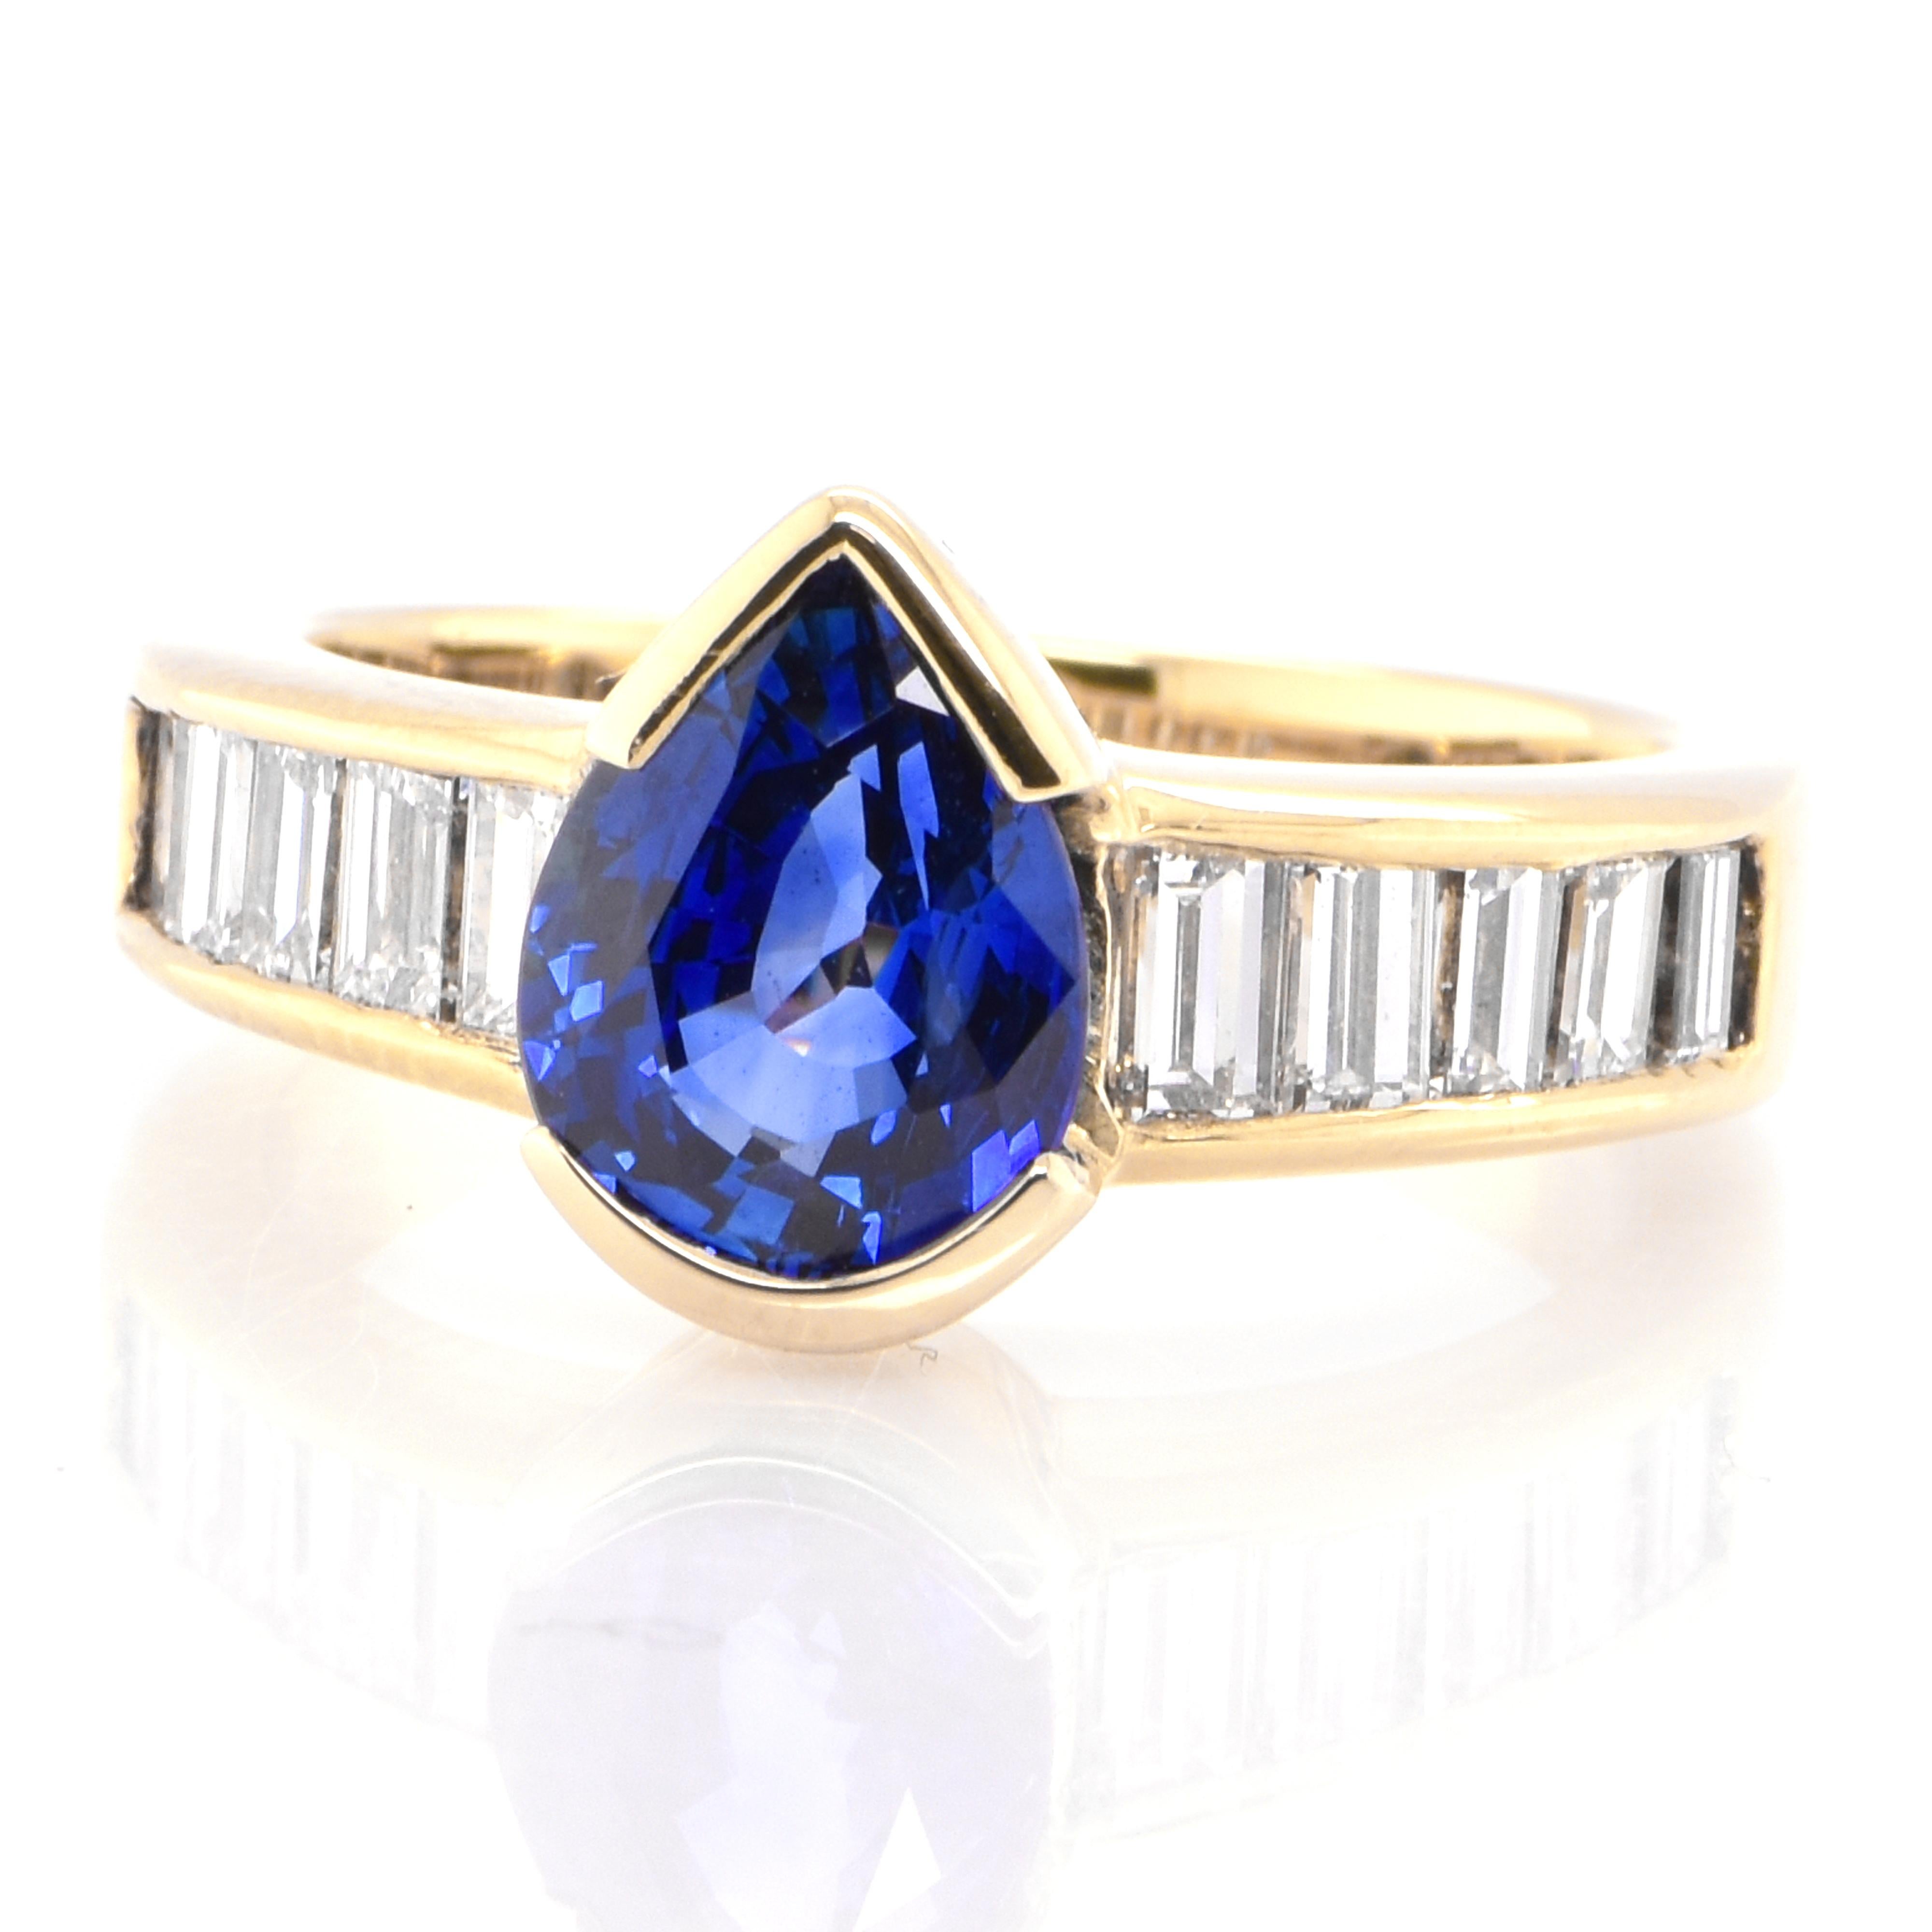 A beautiful ring featuring 2.17 Carat Natural Sapphire and 0.94 Carats Diamond Accents set in 18 Karat Yellow Gold. Sapphires have extraordinary durability - they excel in hardness as well as toughness and durability making them very popular in